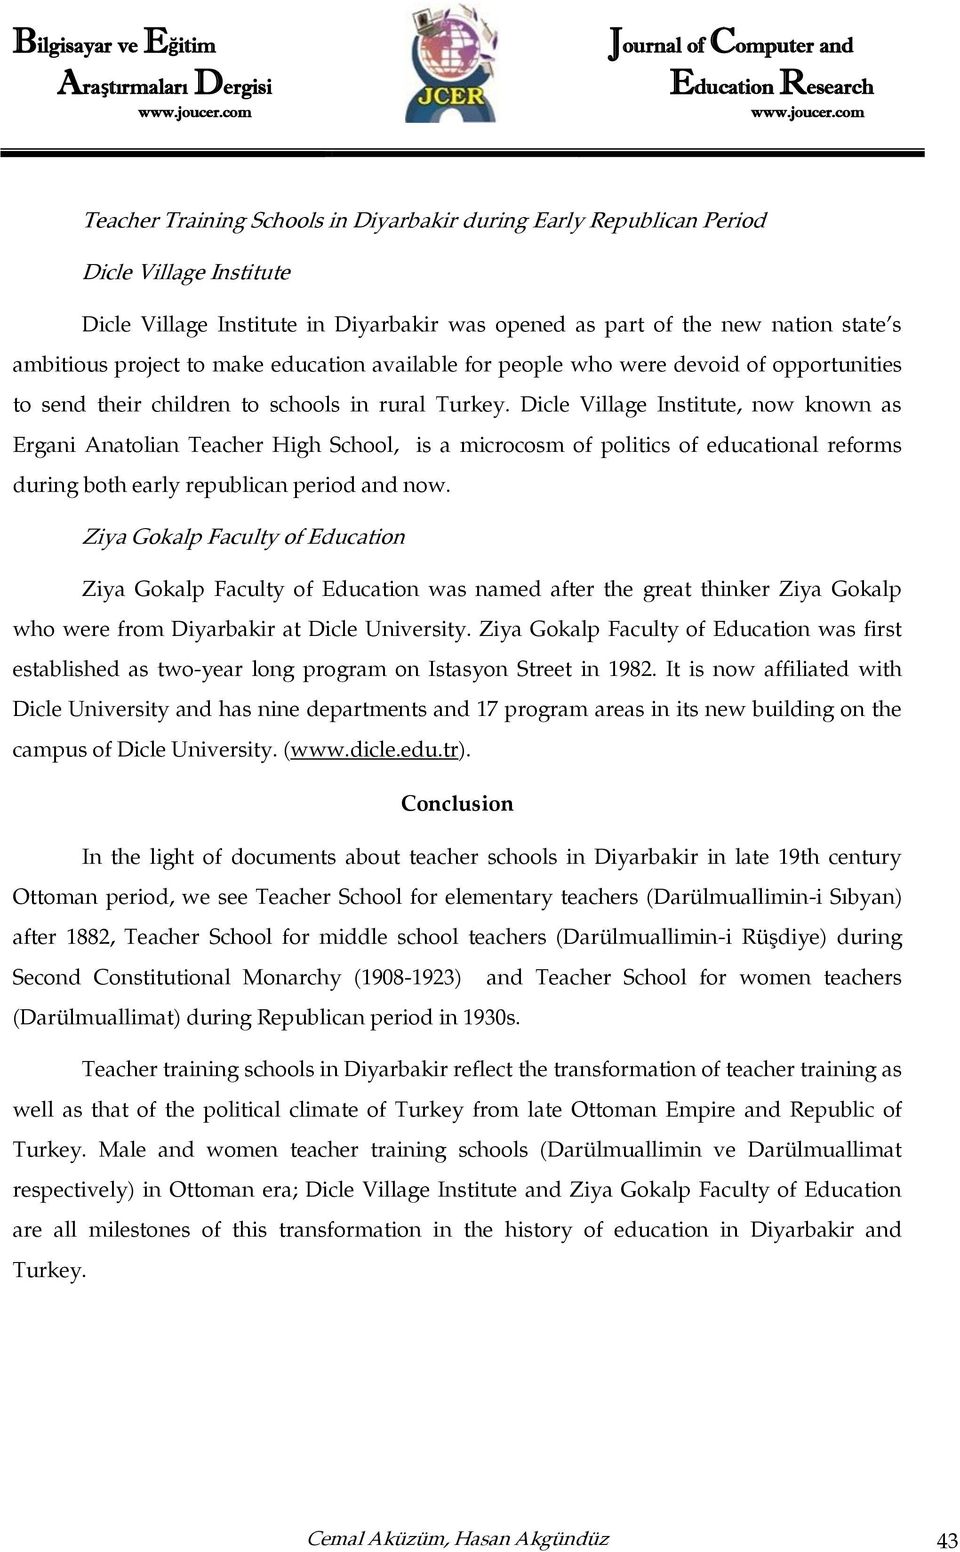 Dicle Village Institute, now known as Ergani Anatolian Teacher High School, is a microcosm of politics of educational reforms during both early republican period and now.